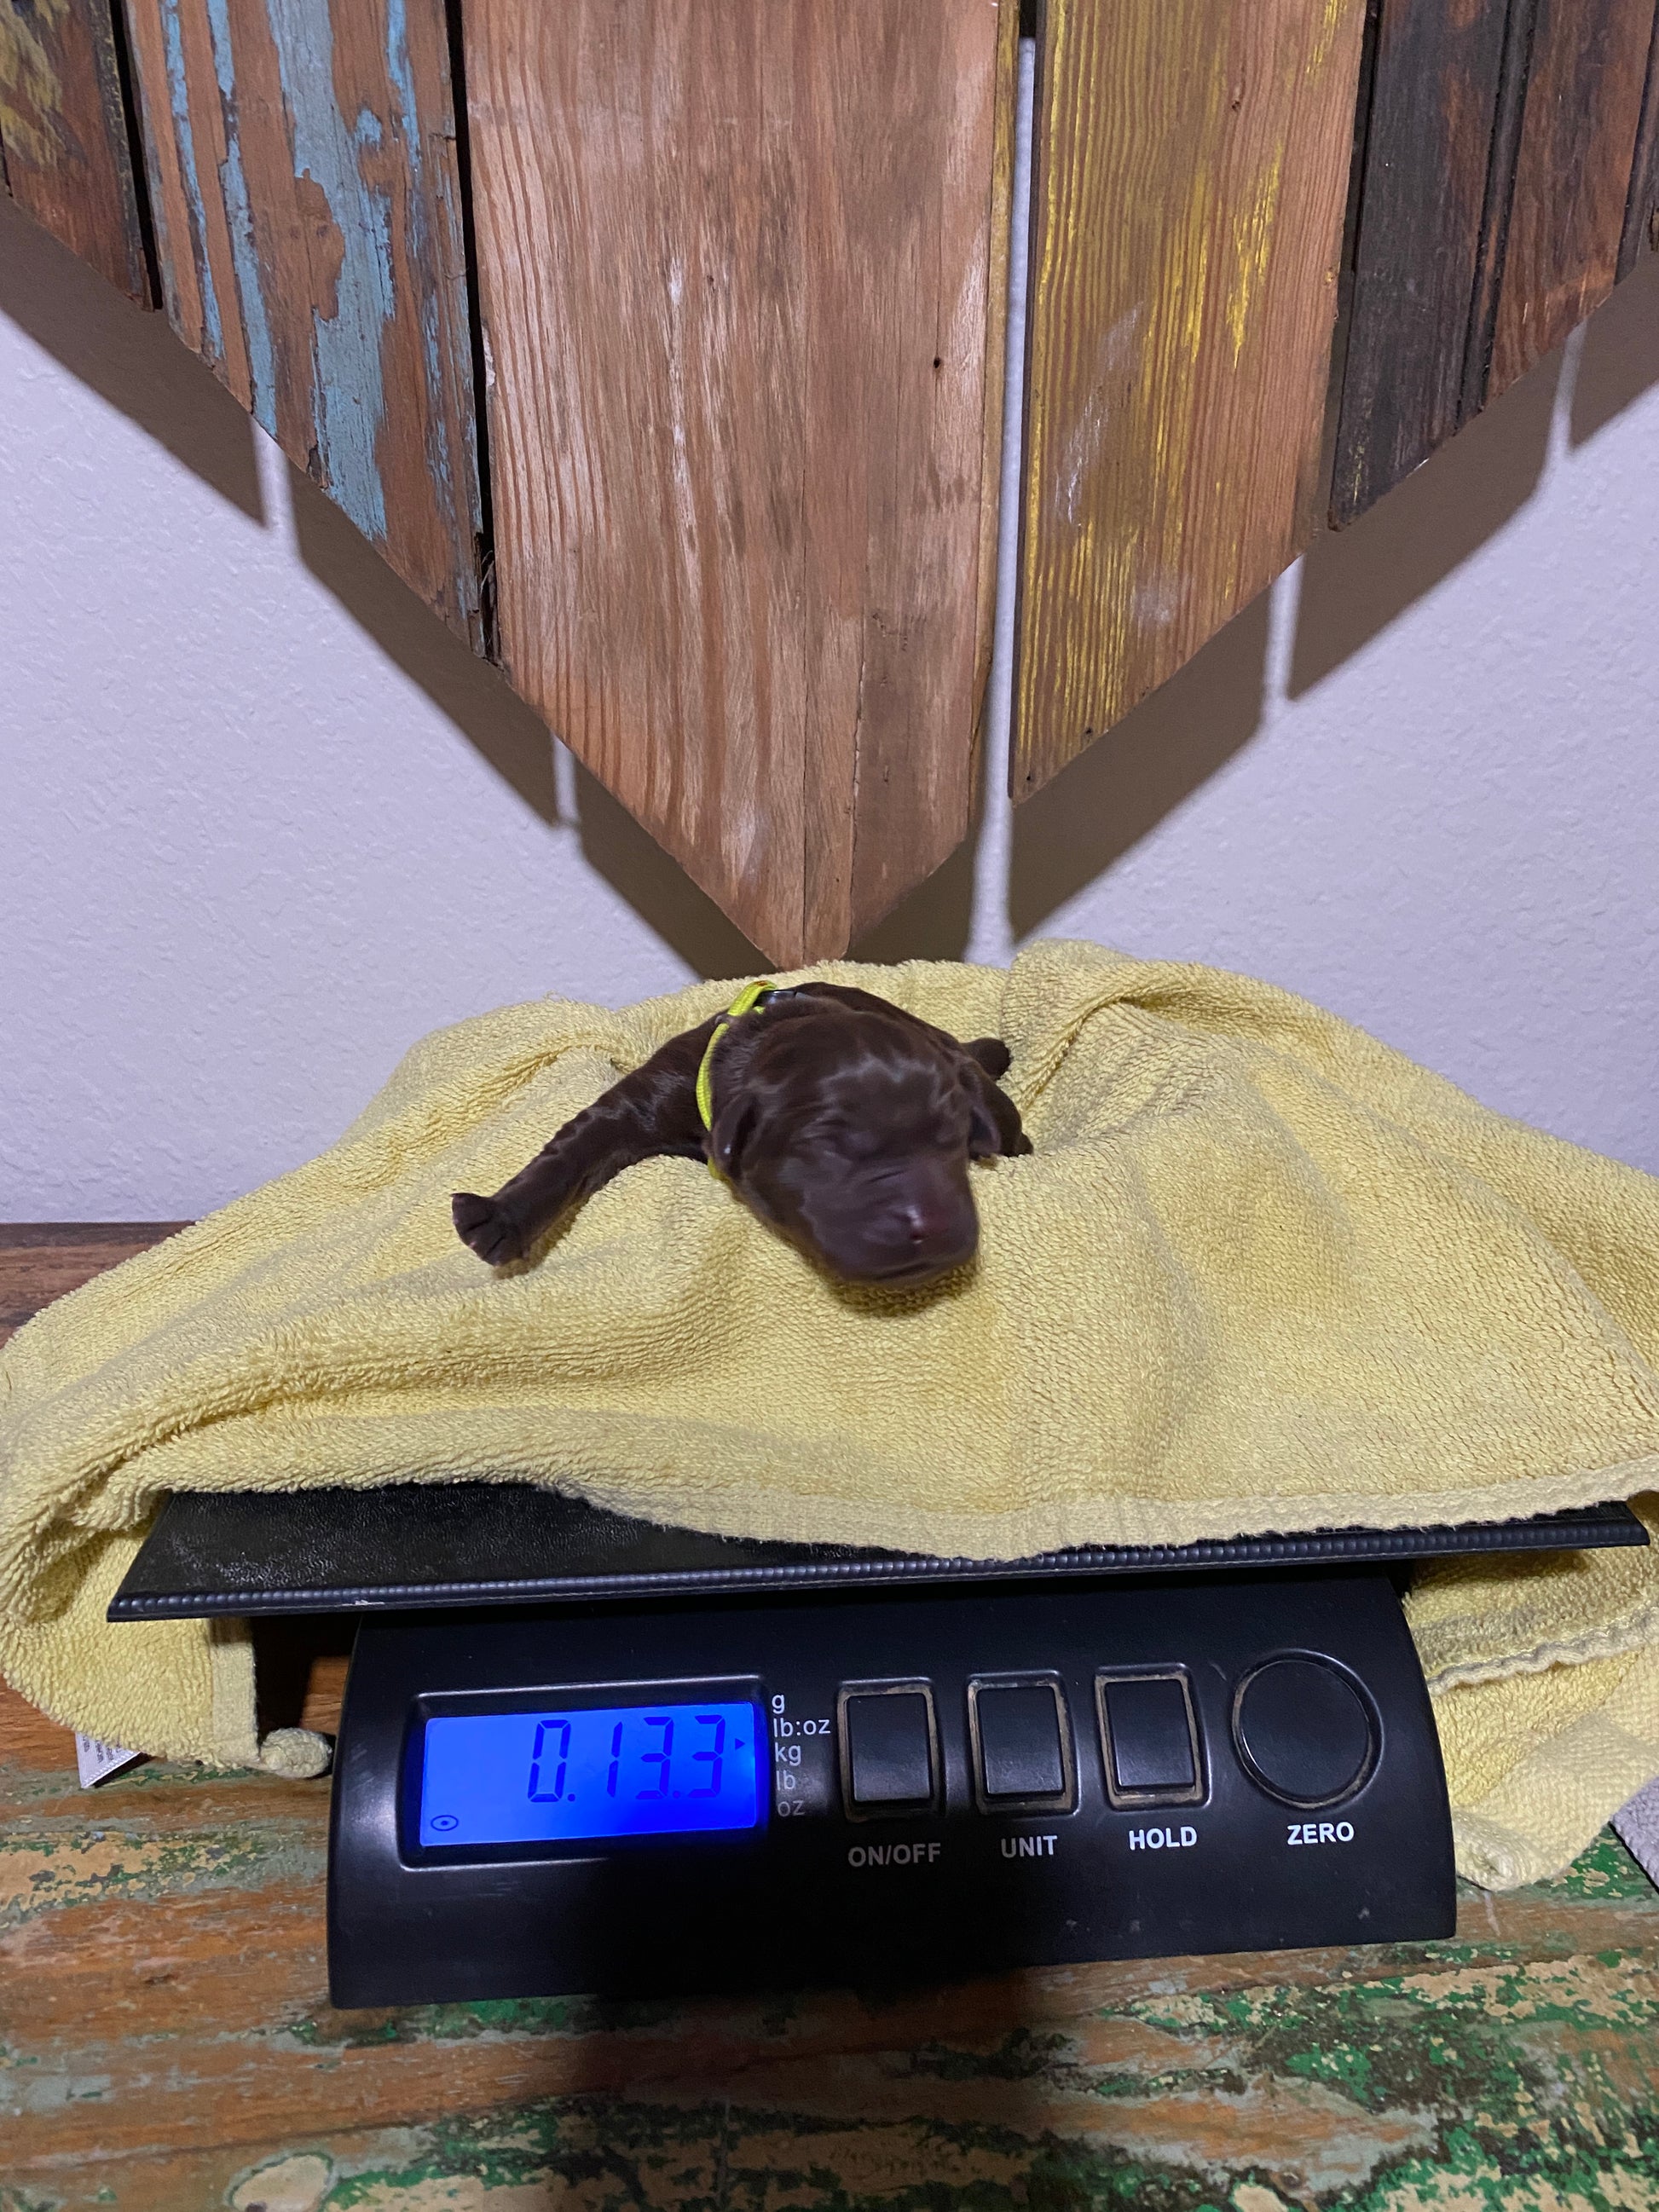 Chocolate Labrador Butterfinger on the scales